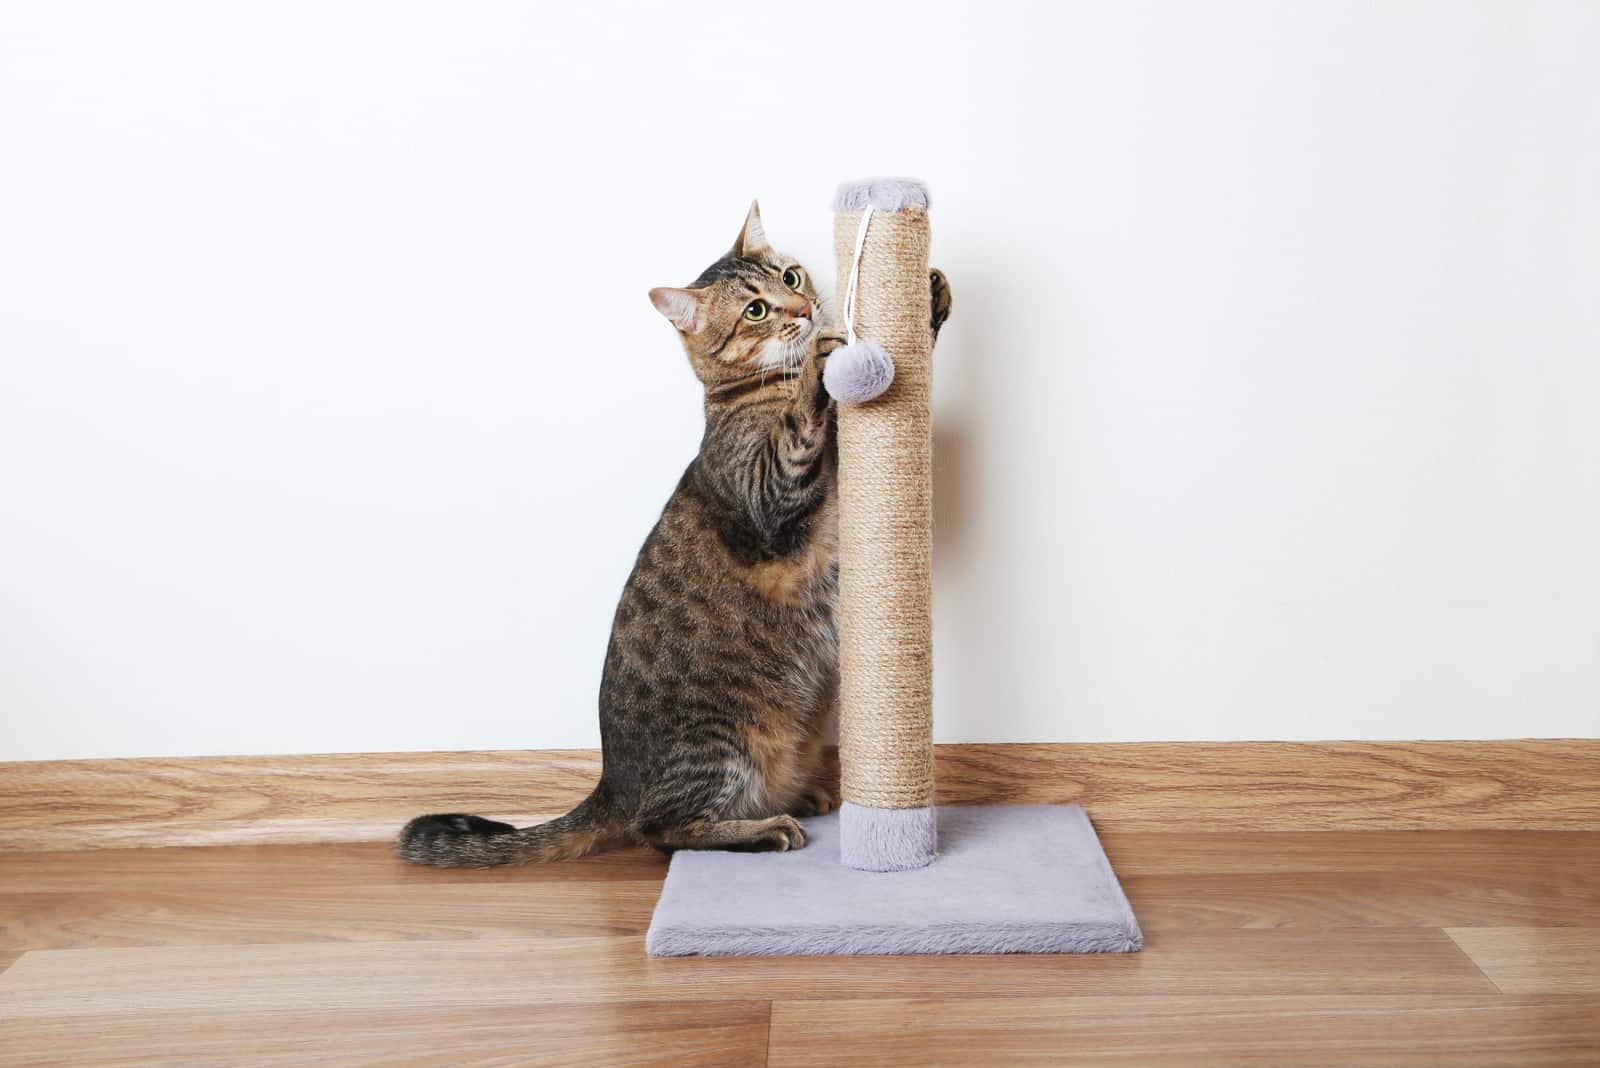 the cat is playing on the scratching post